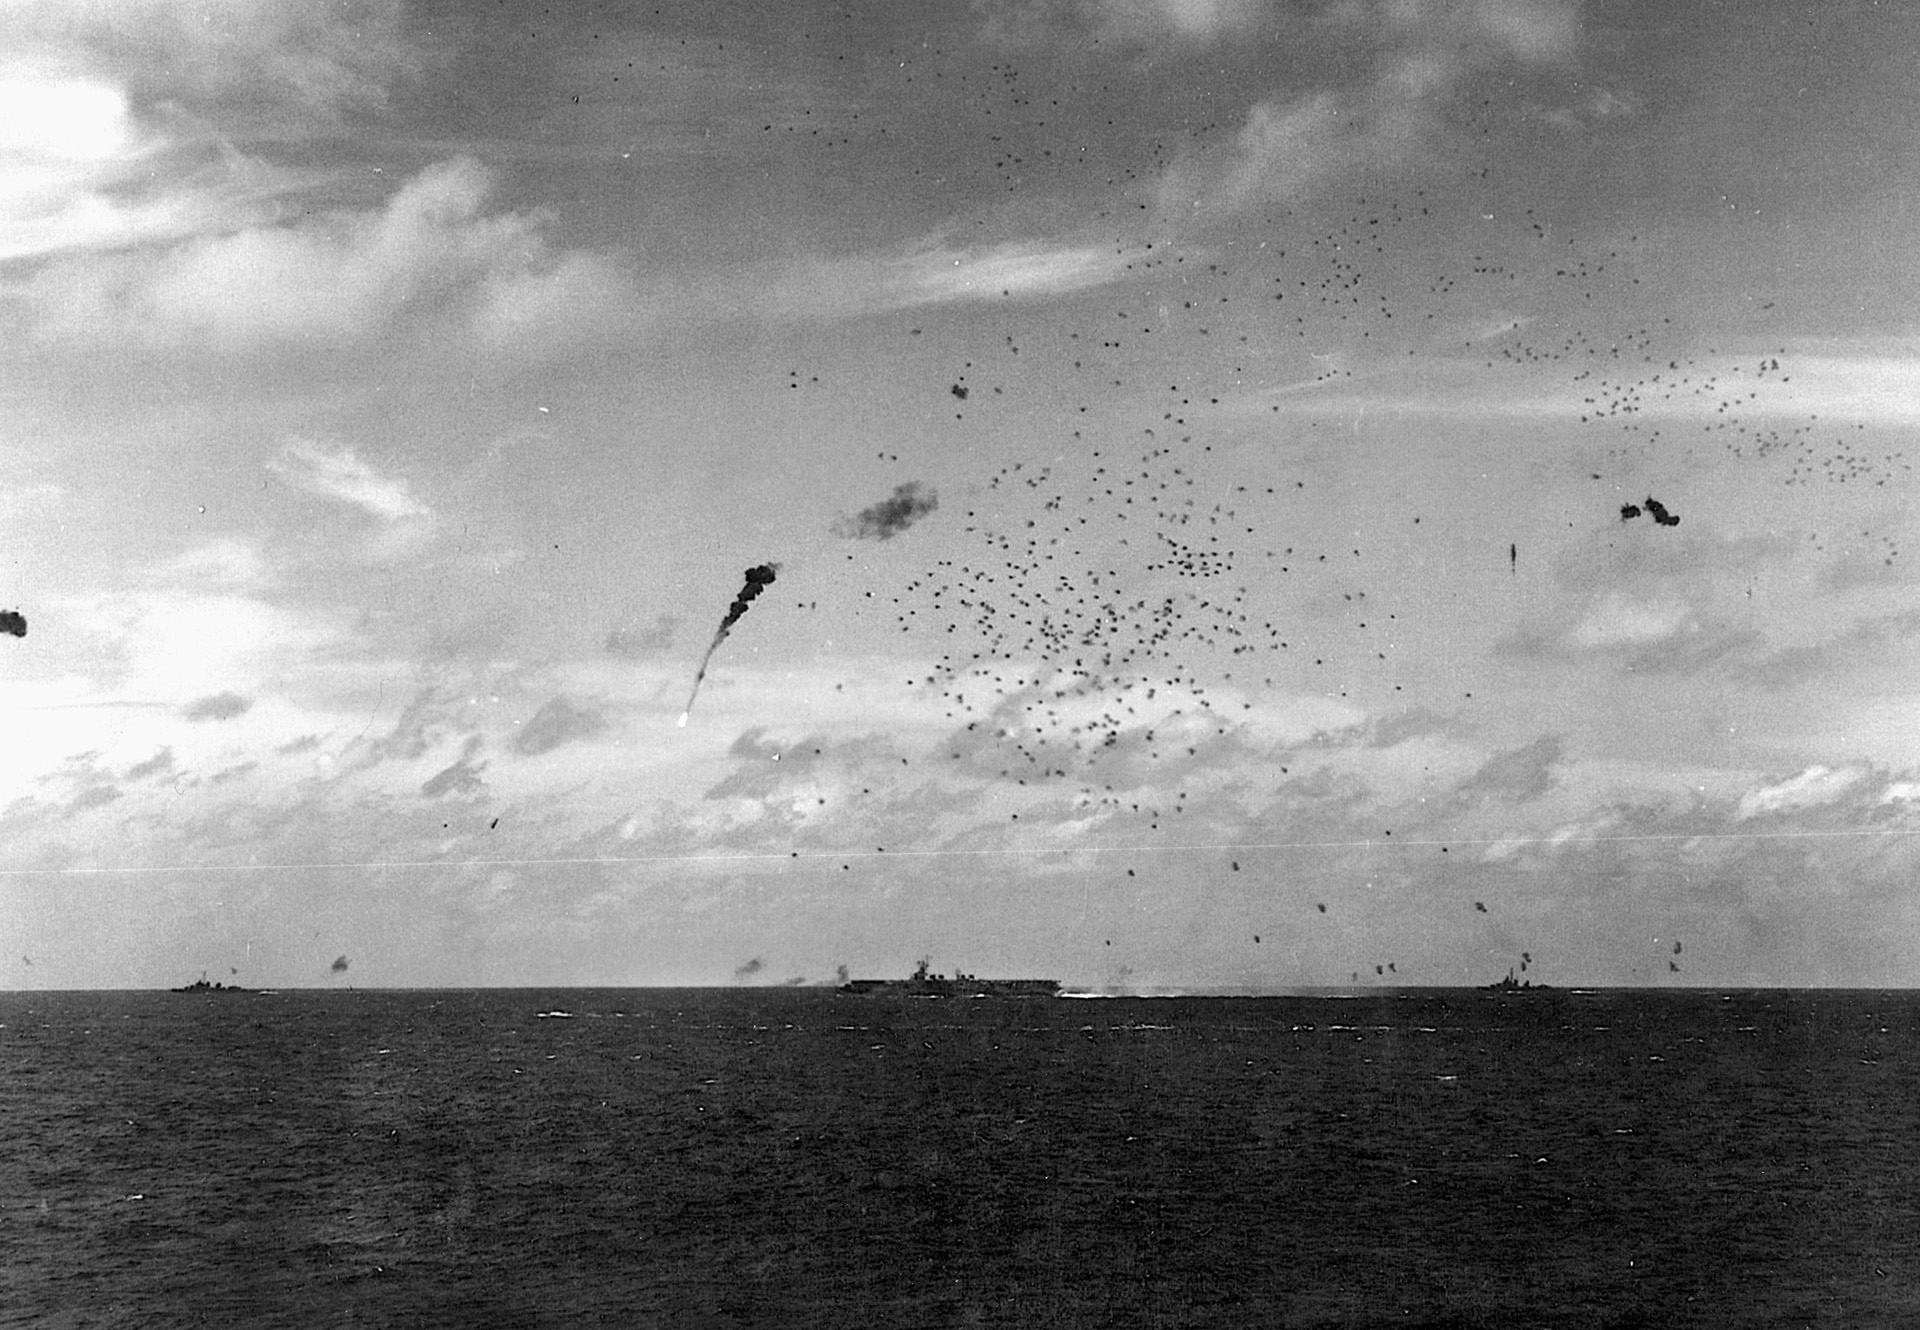 A Japanese aircraft plunges toward the sea after being struck by antiaircraft fire from a U.S. escort carrier.